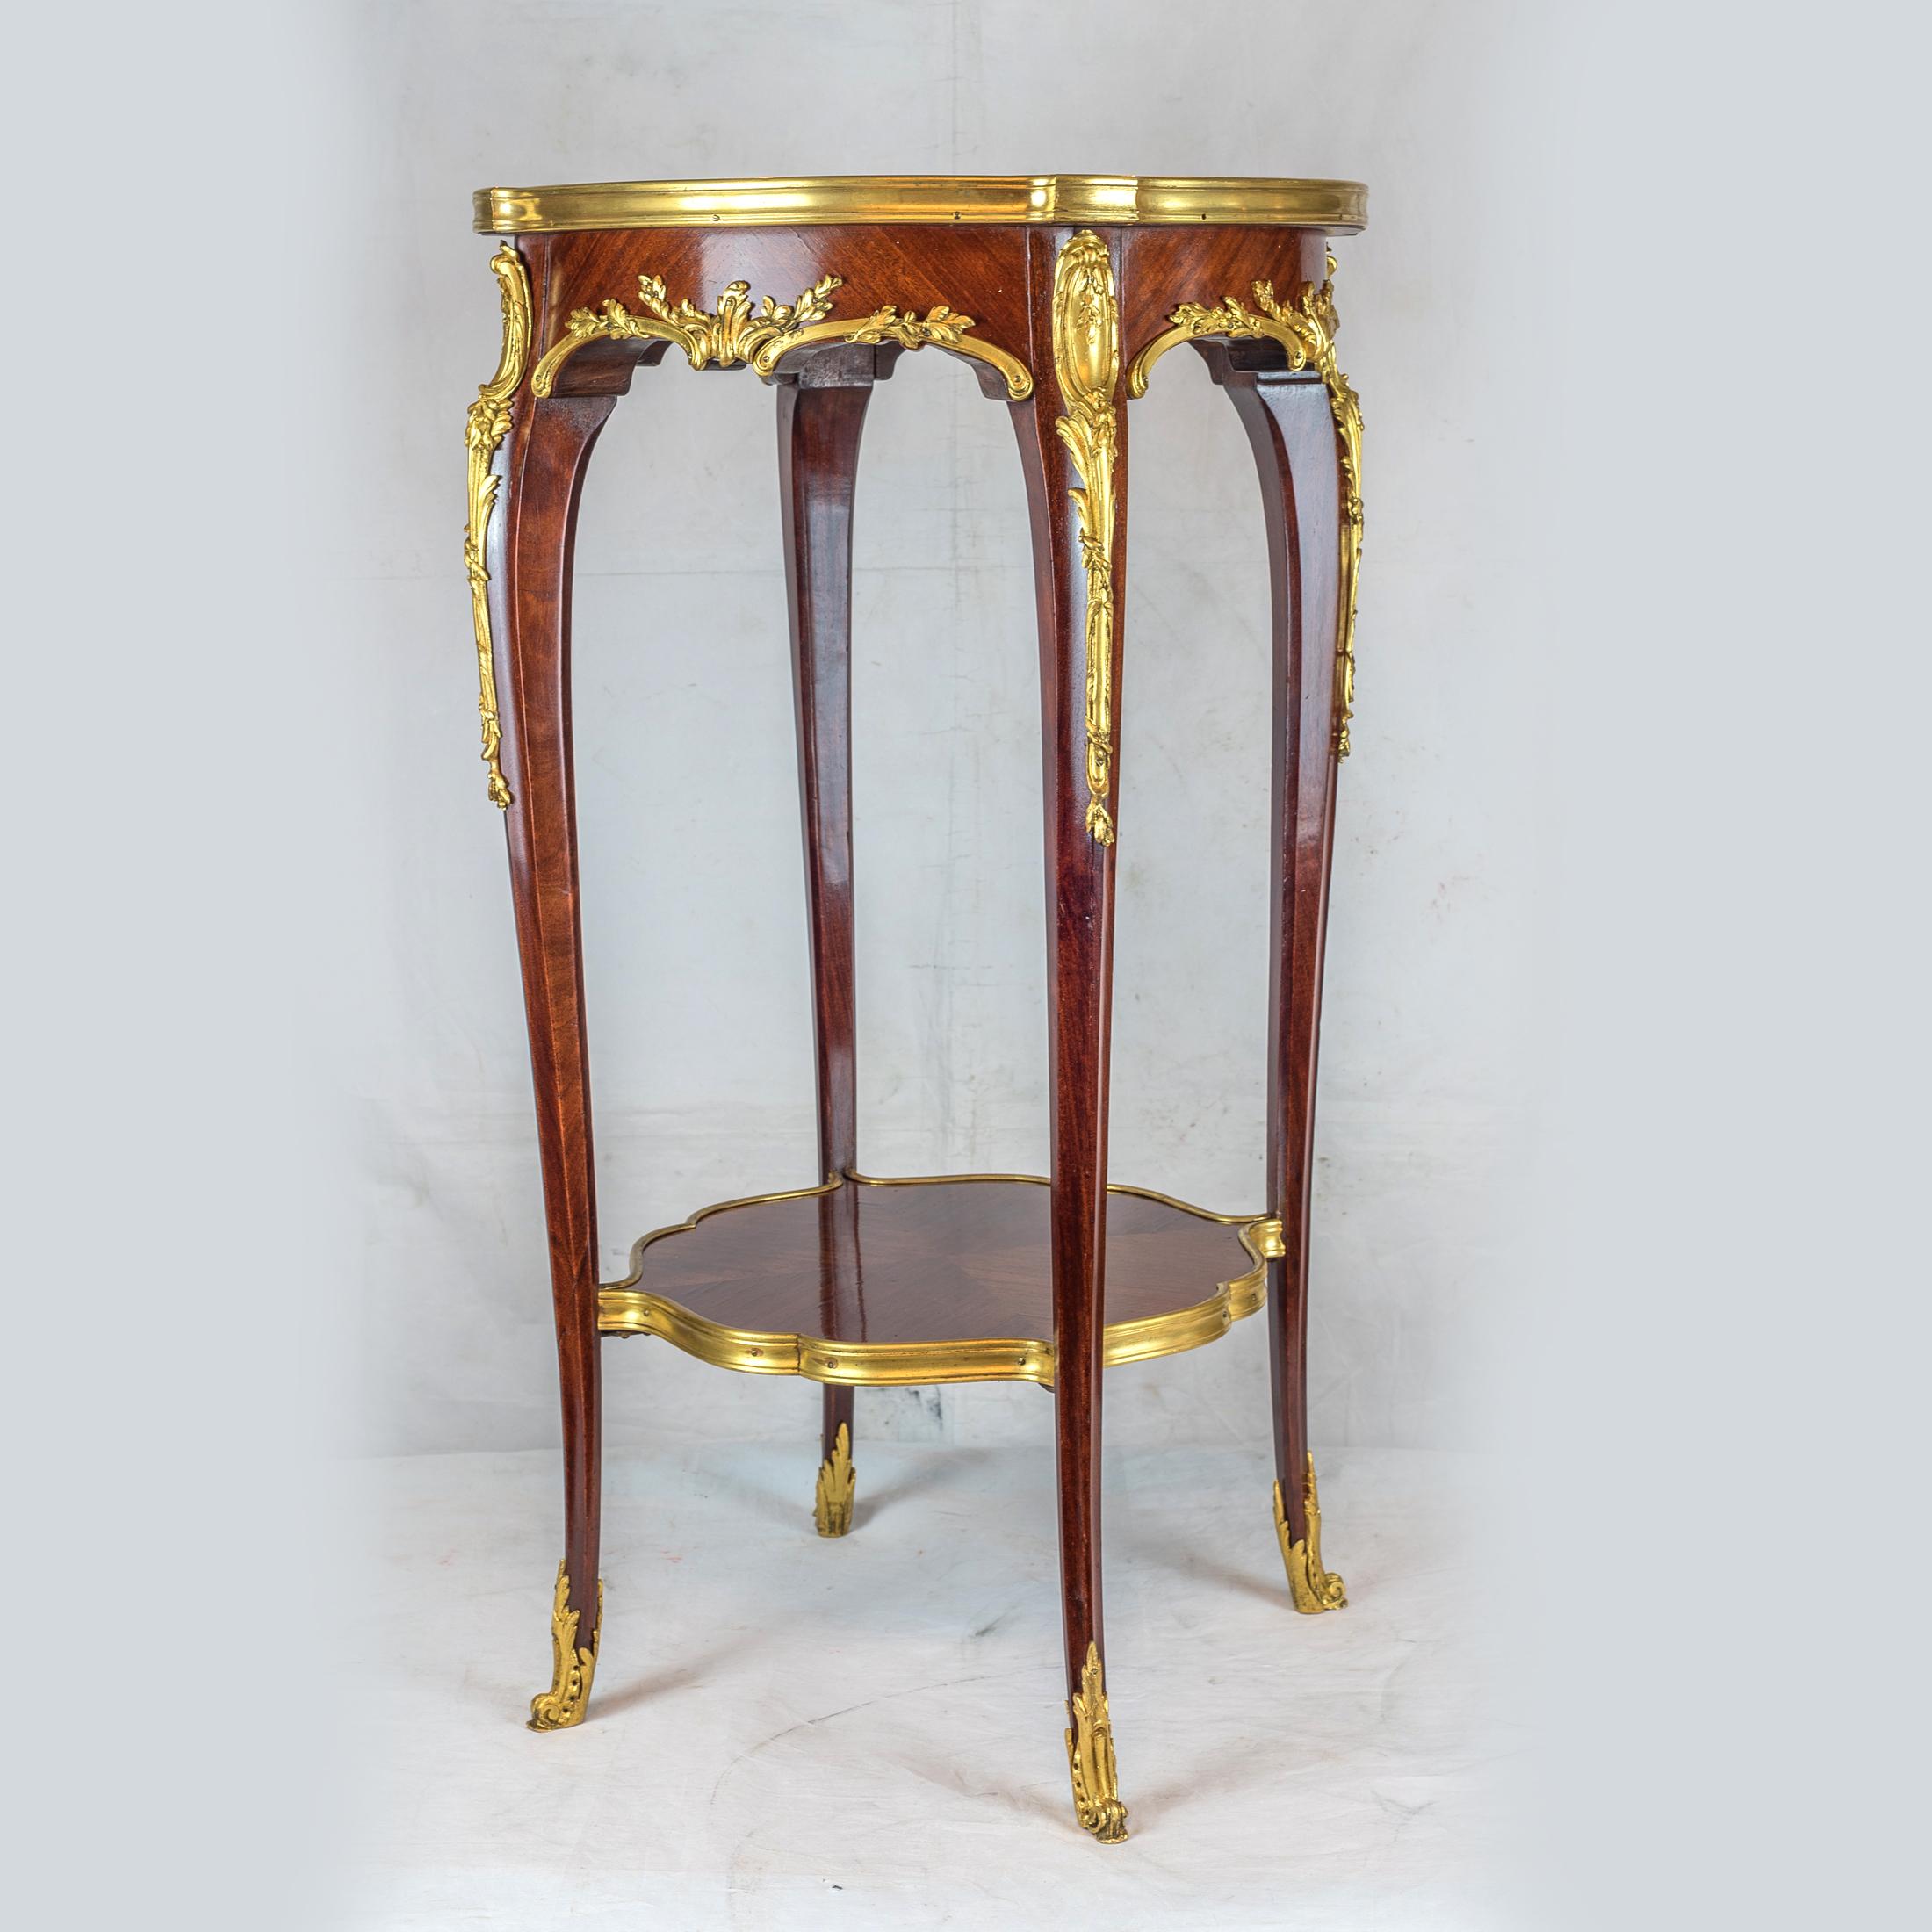 A fine Louis XV style gilt bronze mounted mahogany and marble-top side table.

Attributed to Joseph-Emmanuel Zwiener (1848-1895)
Origin: French
Date: 19th century
Dimension: H 29 3/8 in x D 16 1/2 in.